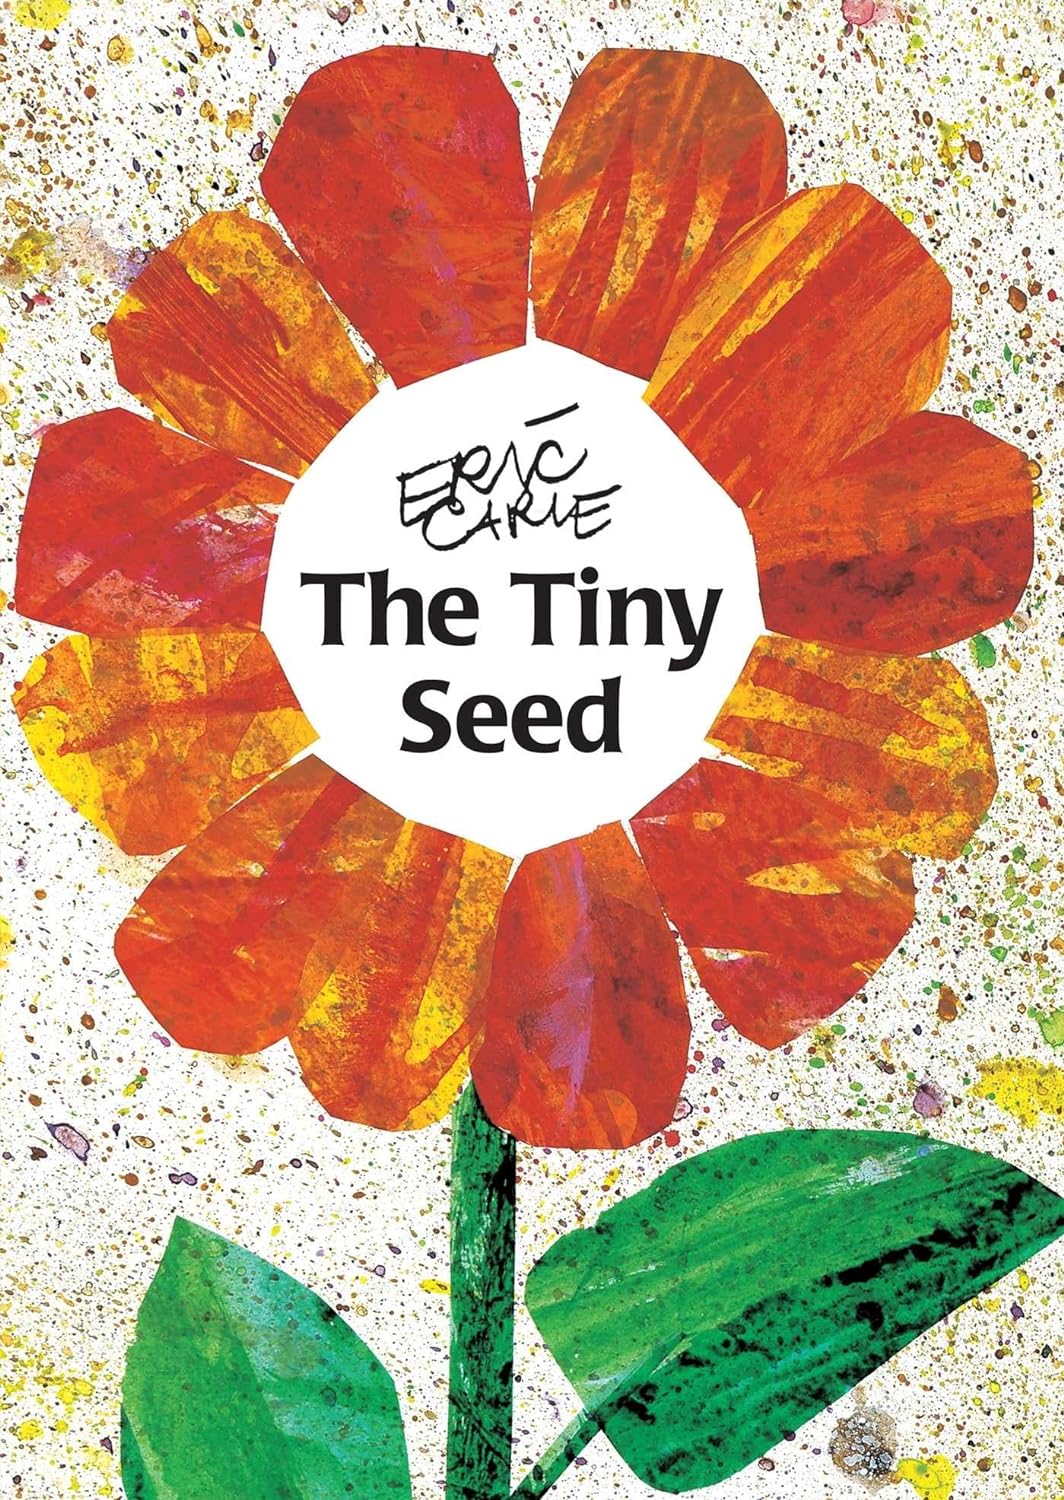 Little Simon 'The Tiny Seed' by Eric Carle